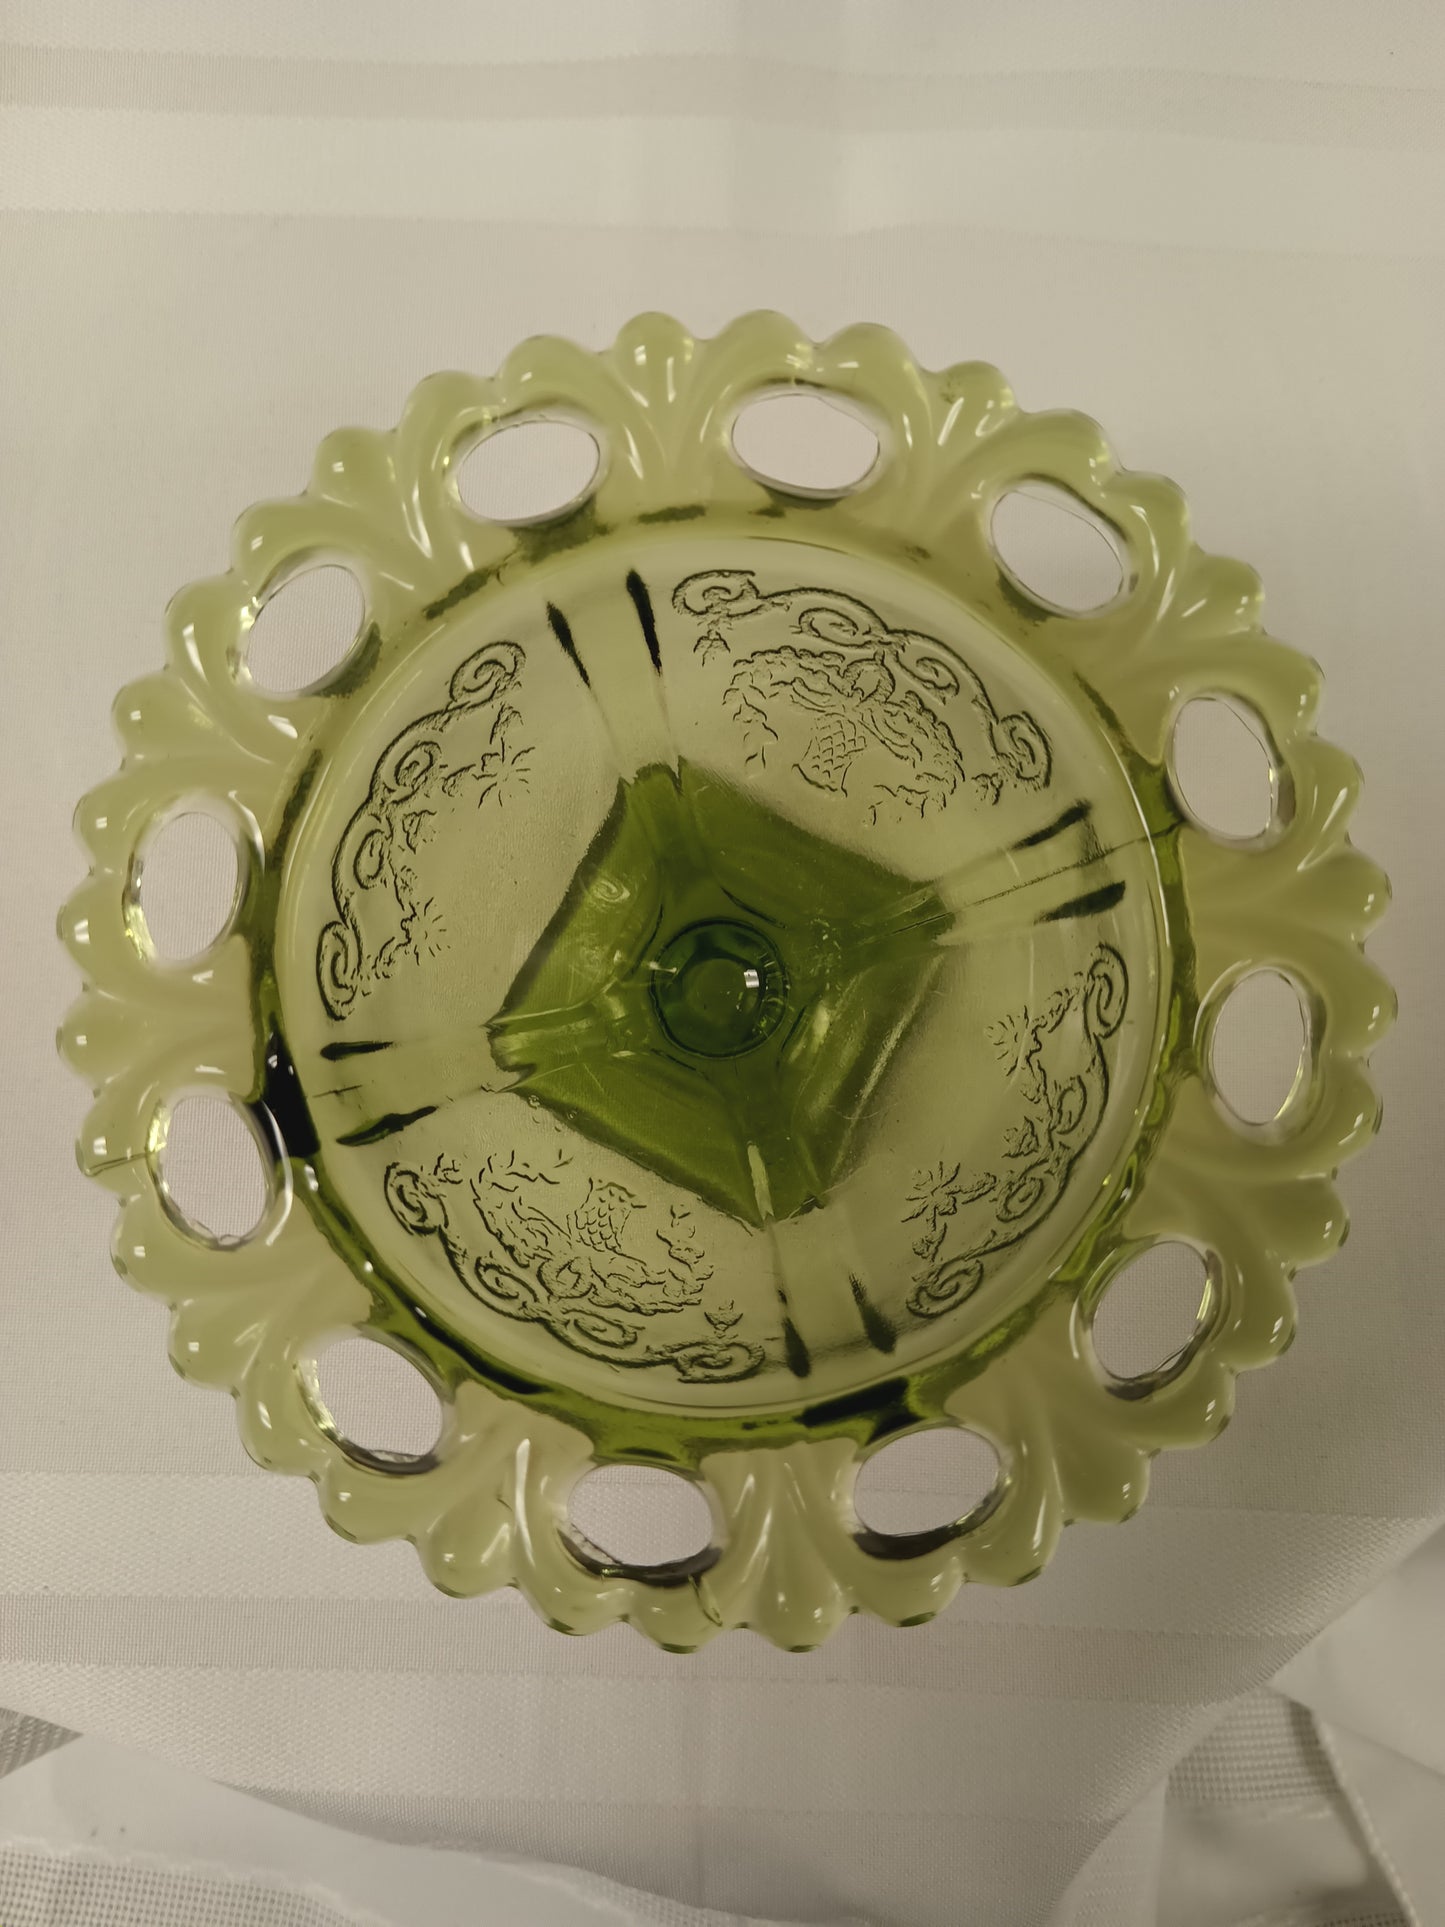 Vintage Indiana Glass Avocado Green Loraine Pattern Capote Dish